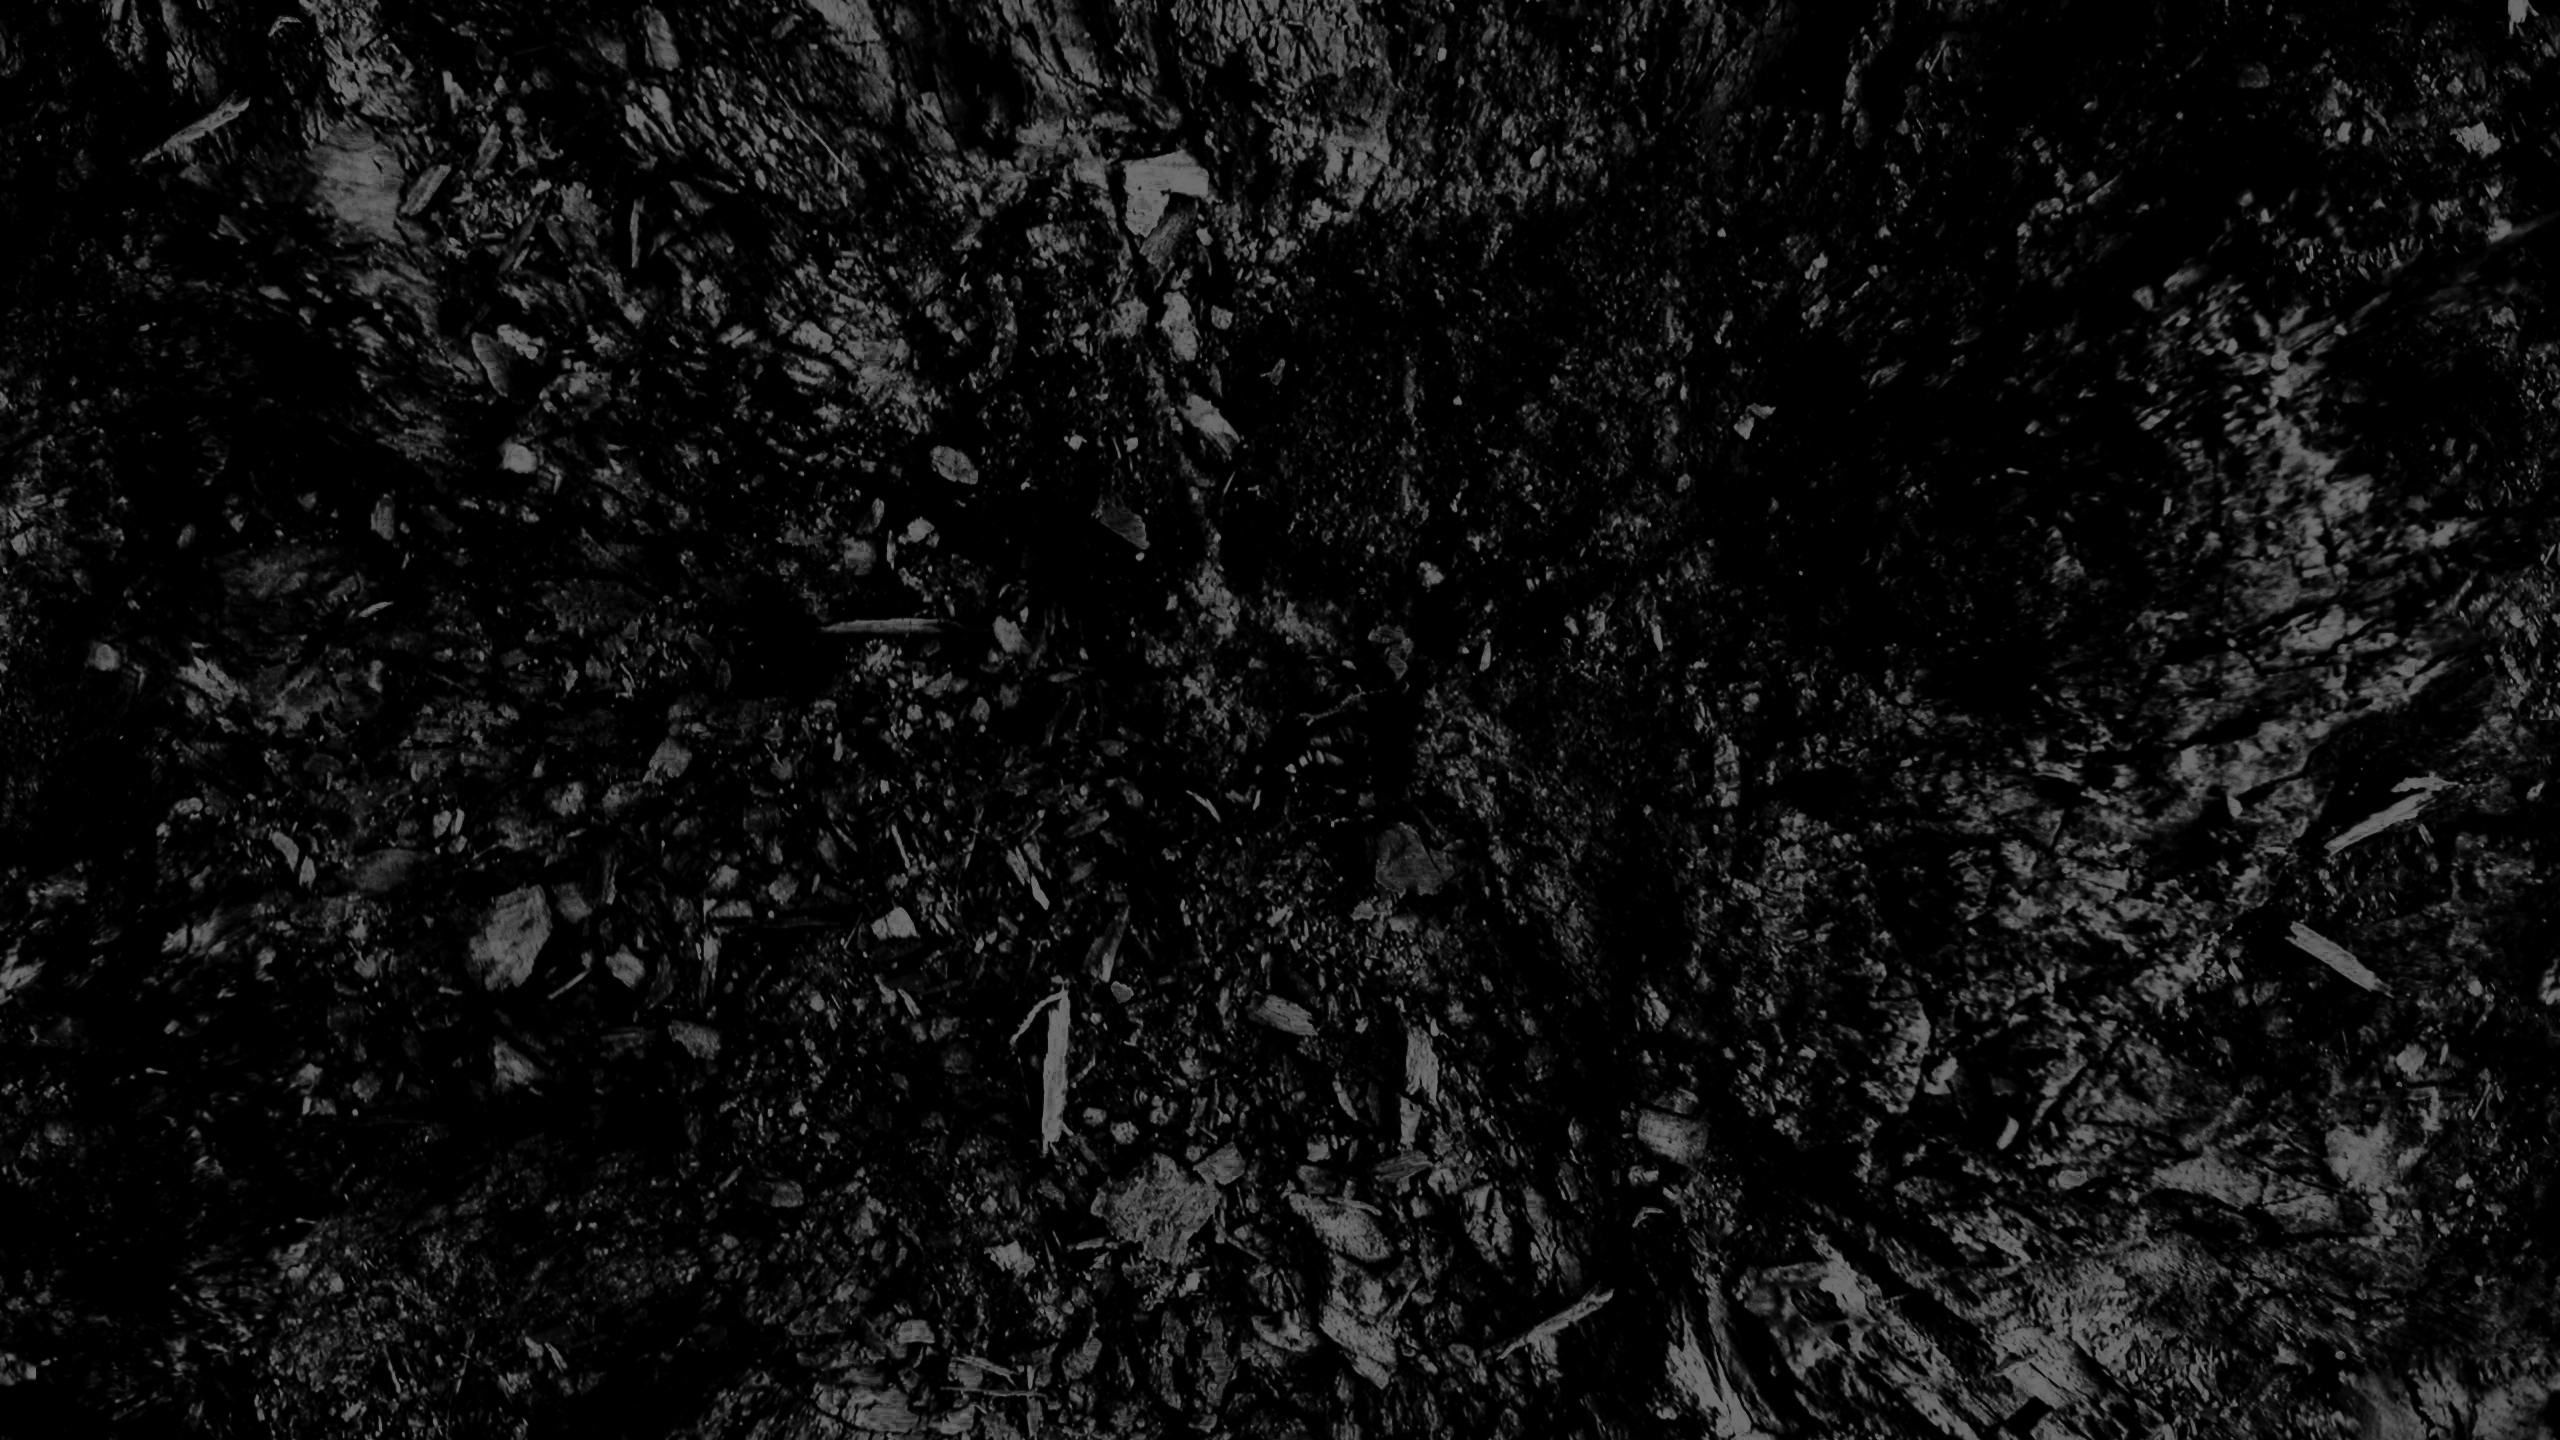 Download Wallpaper 2560x1440 Dark, Black and white, Abstract ...